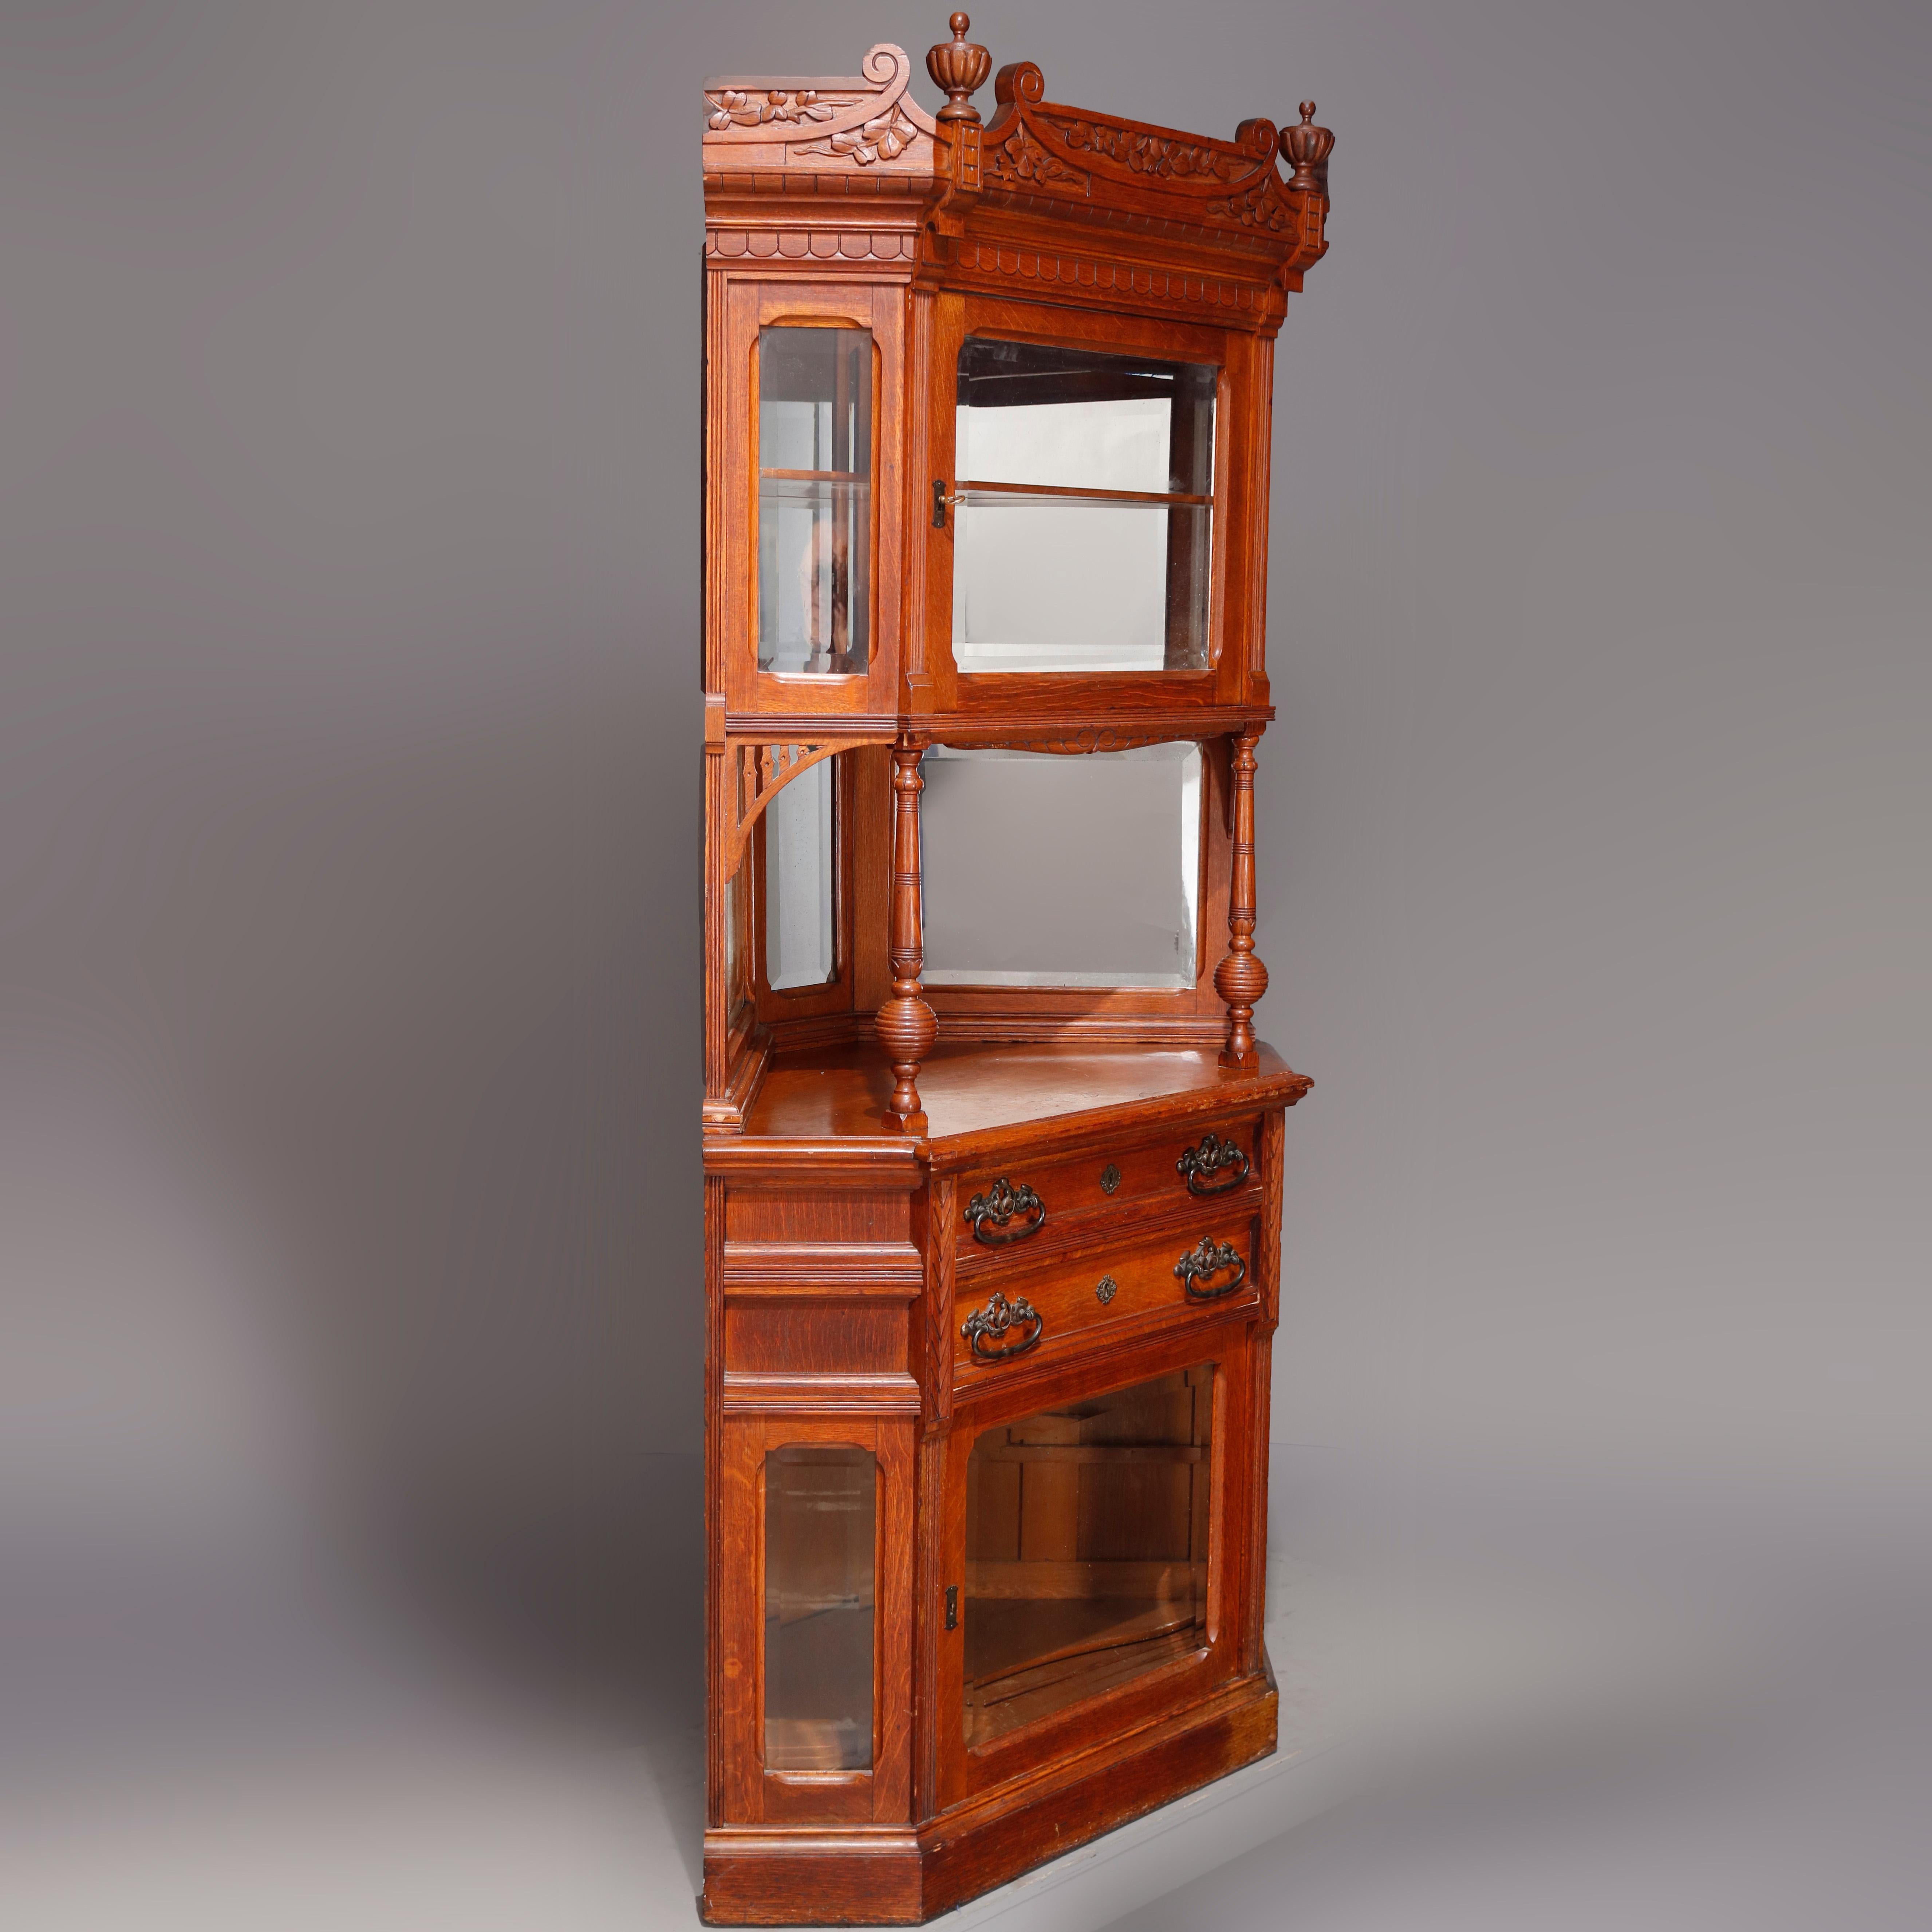 An antique R.J. Horner oak corner cabinet offers oak construction in aceted form with cared foliate and ur crest having flanking finials surmounting enclosed glass vitrine with mirror back and open gallery, lower case with two upper drawers over